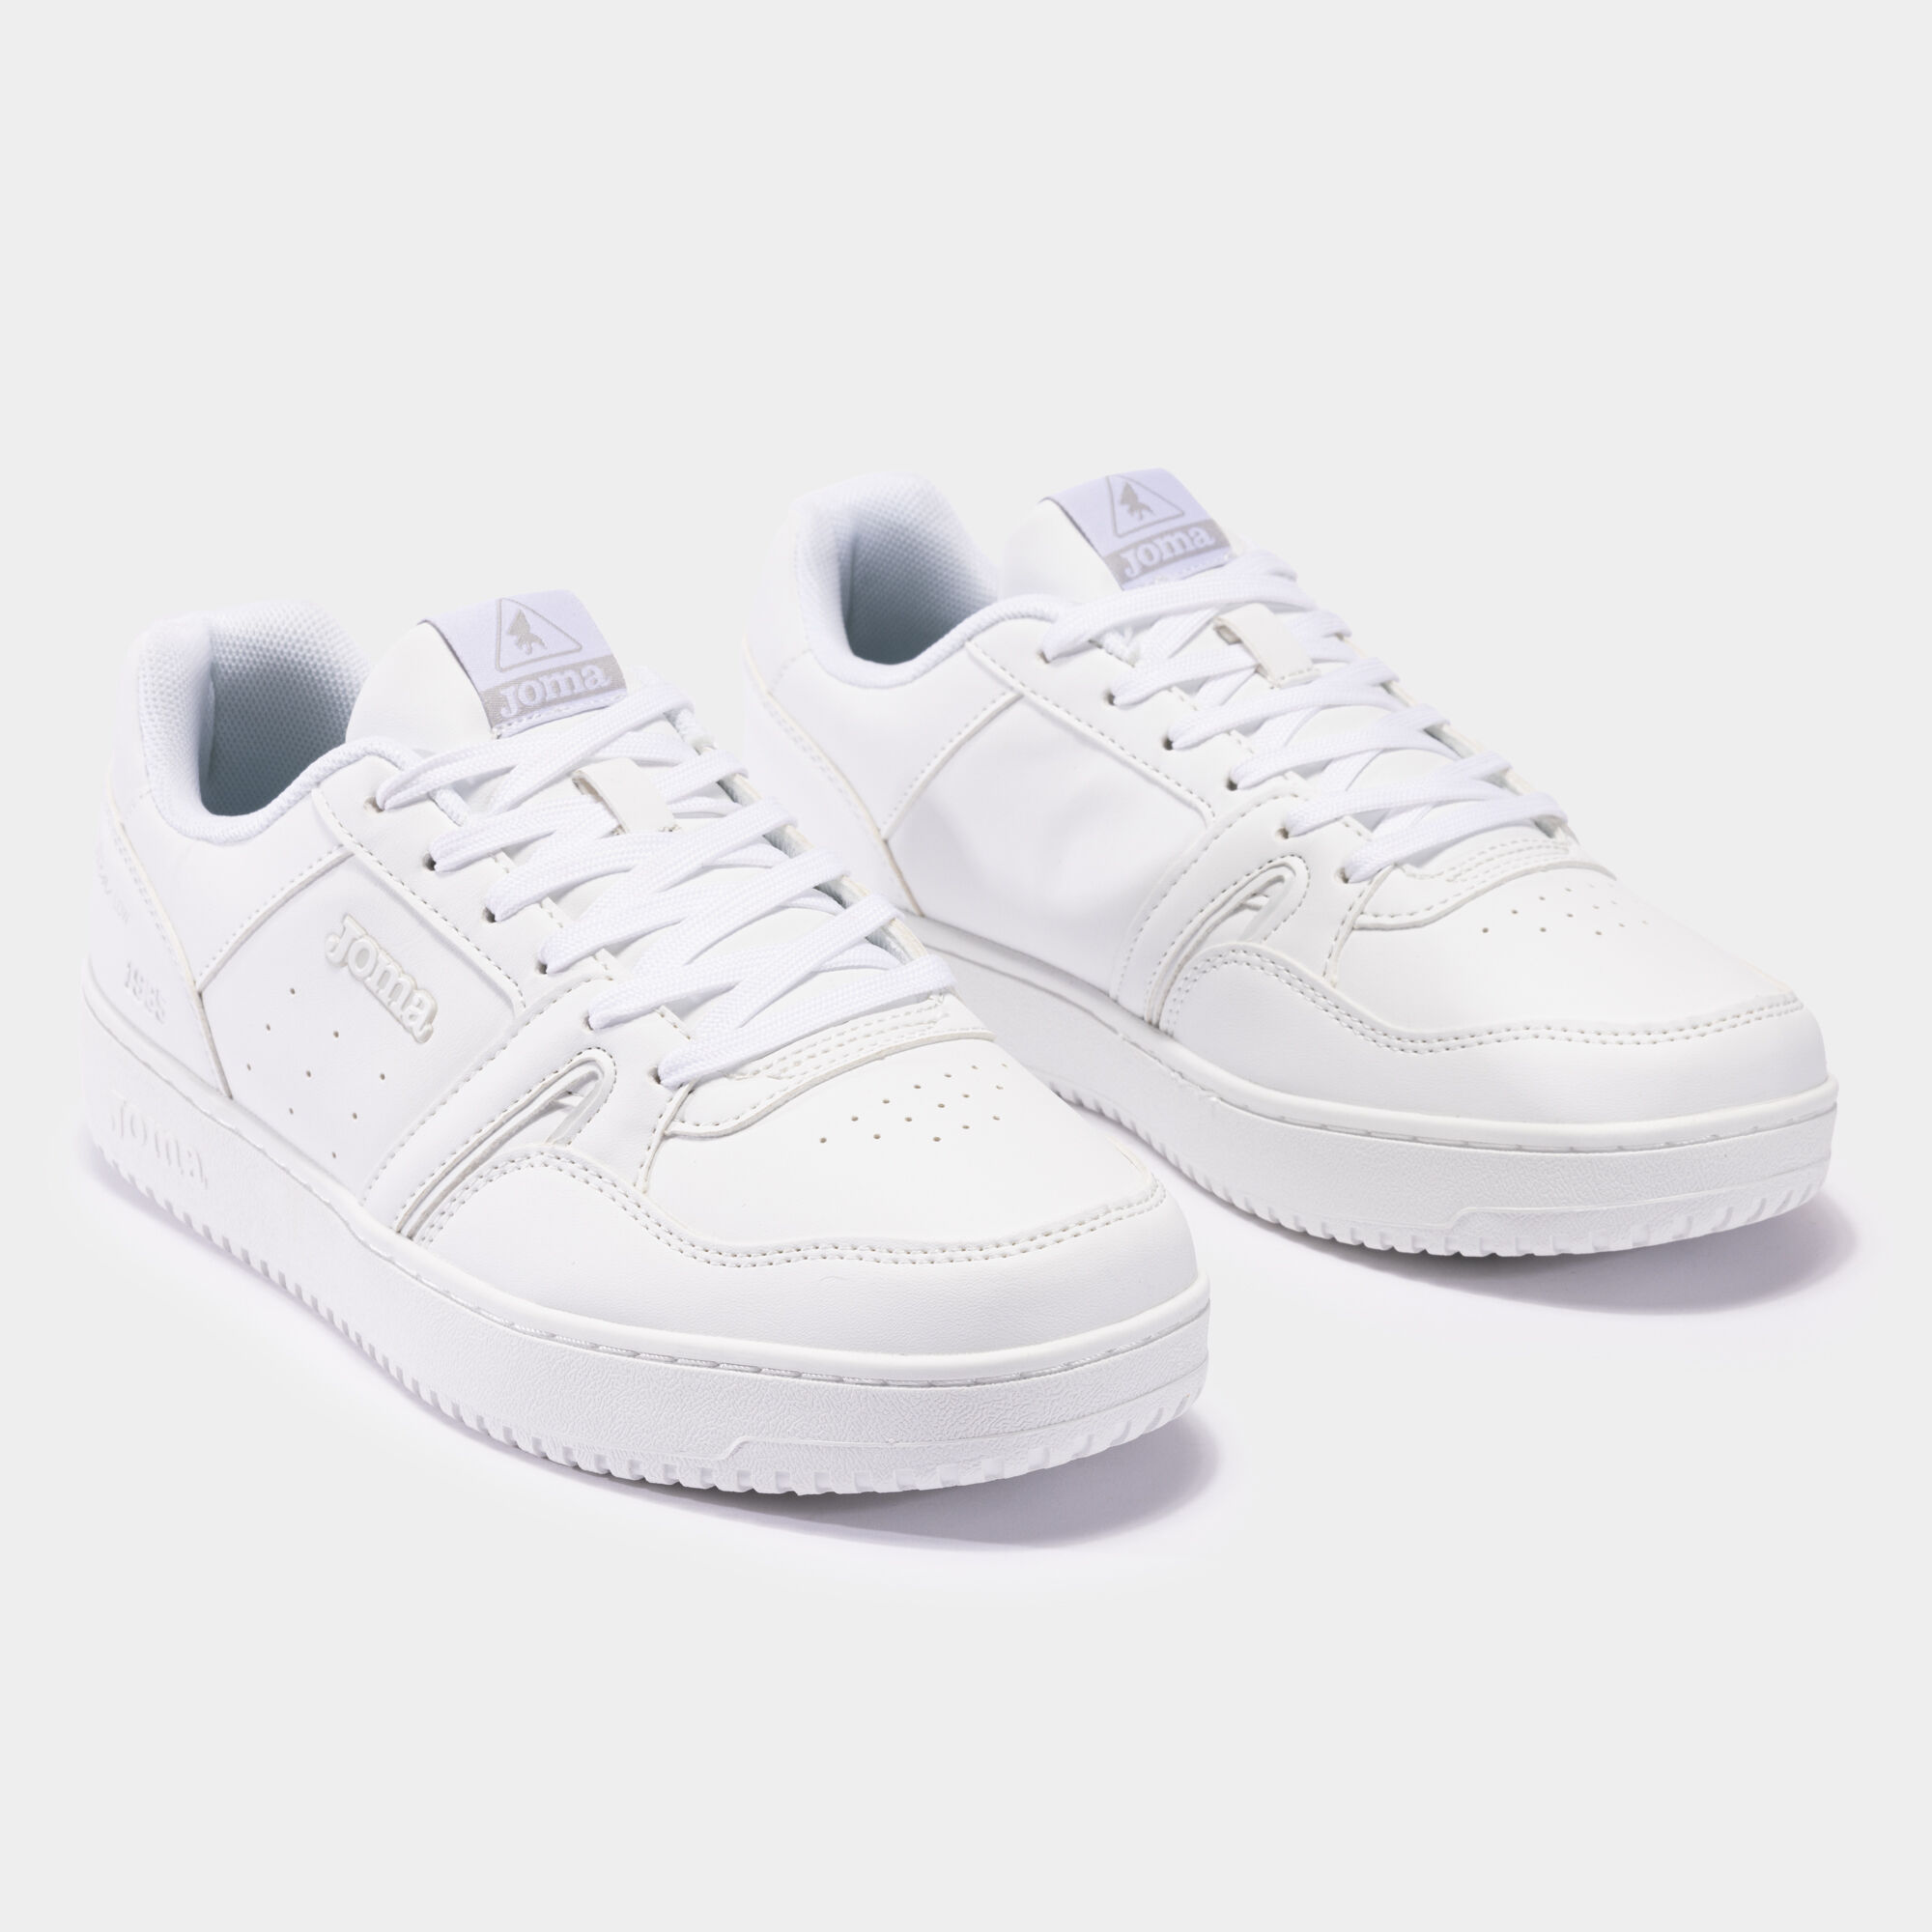 Chaussures casual C.Platea Low 23 unisexe blanc